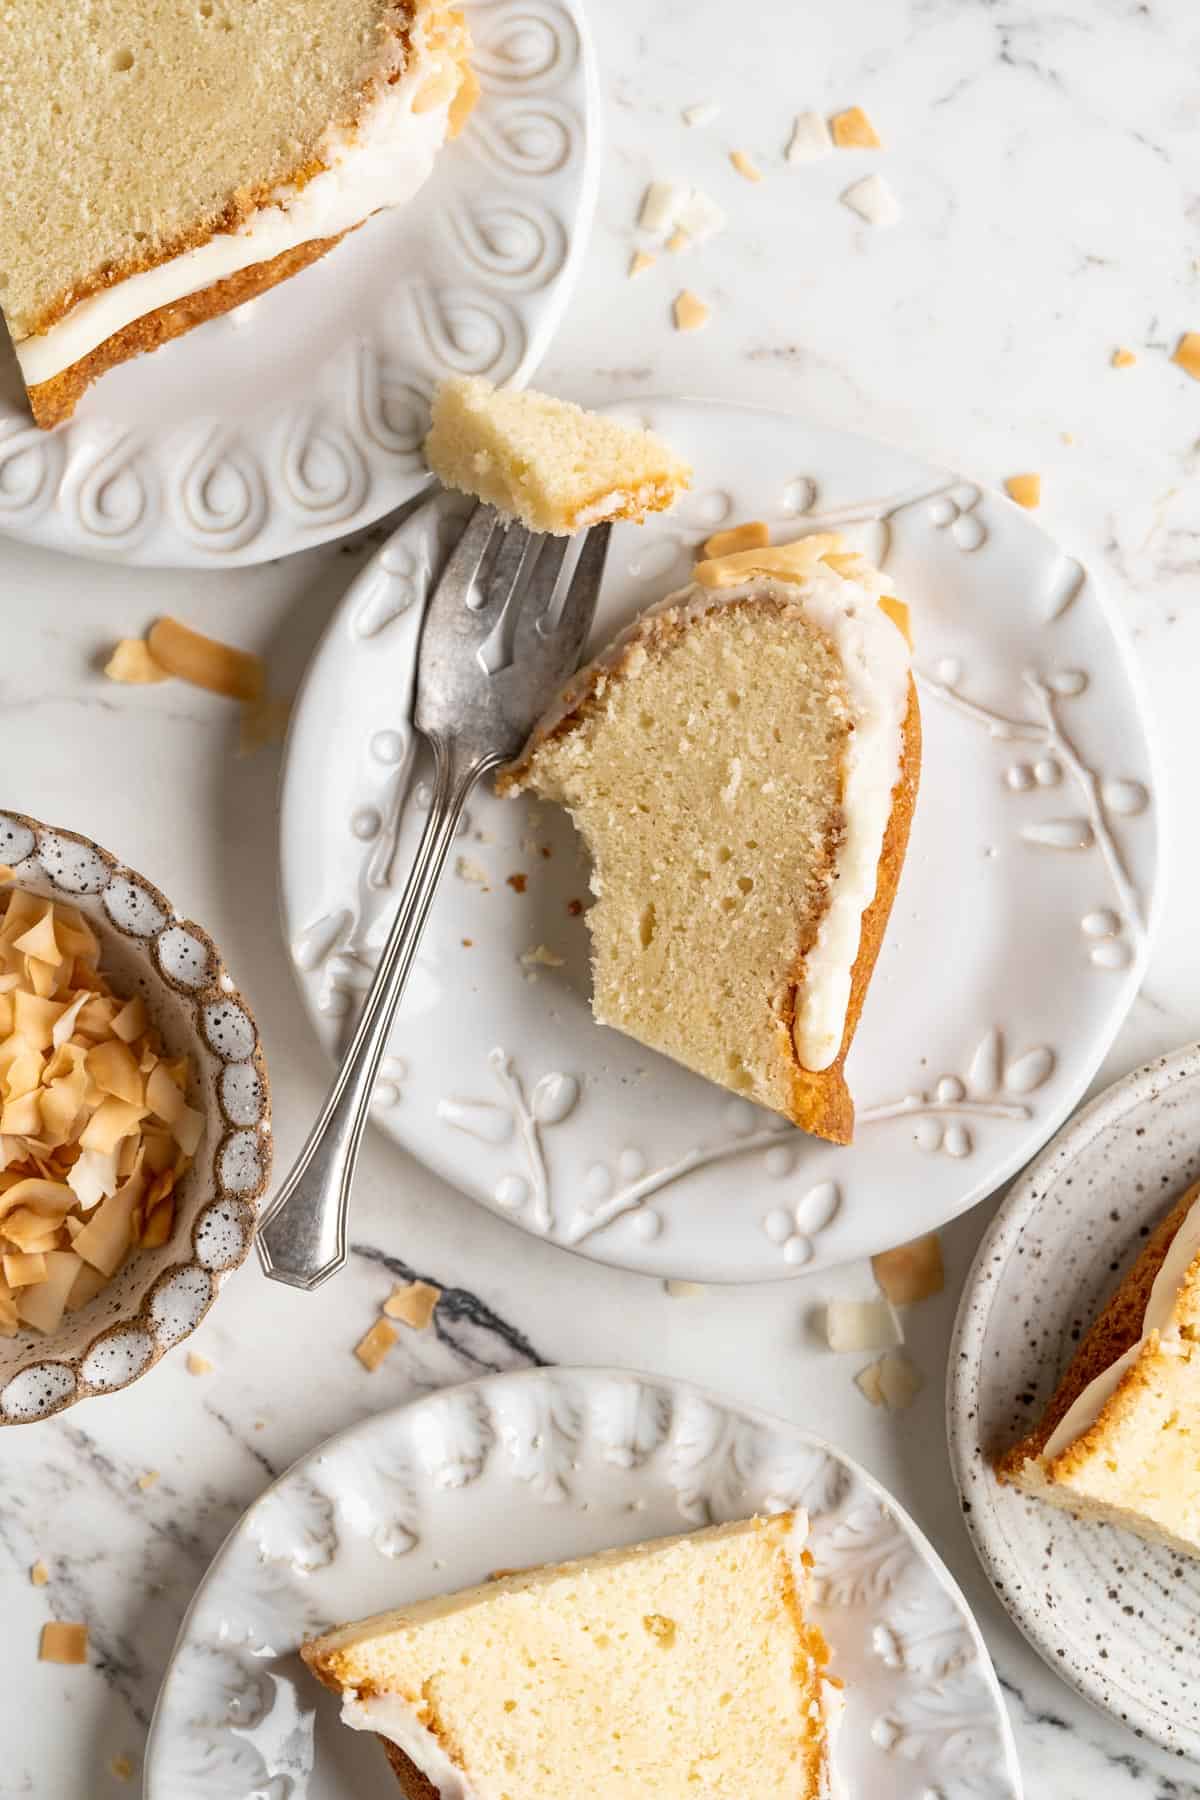 Several slices of coconut pound cake on white plates with one slice partially eaten with a fork next to it